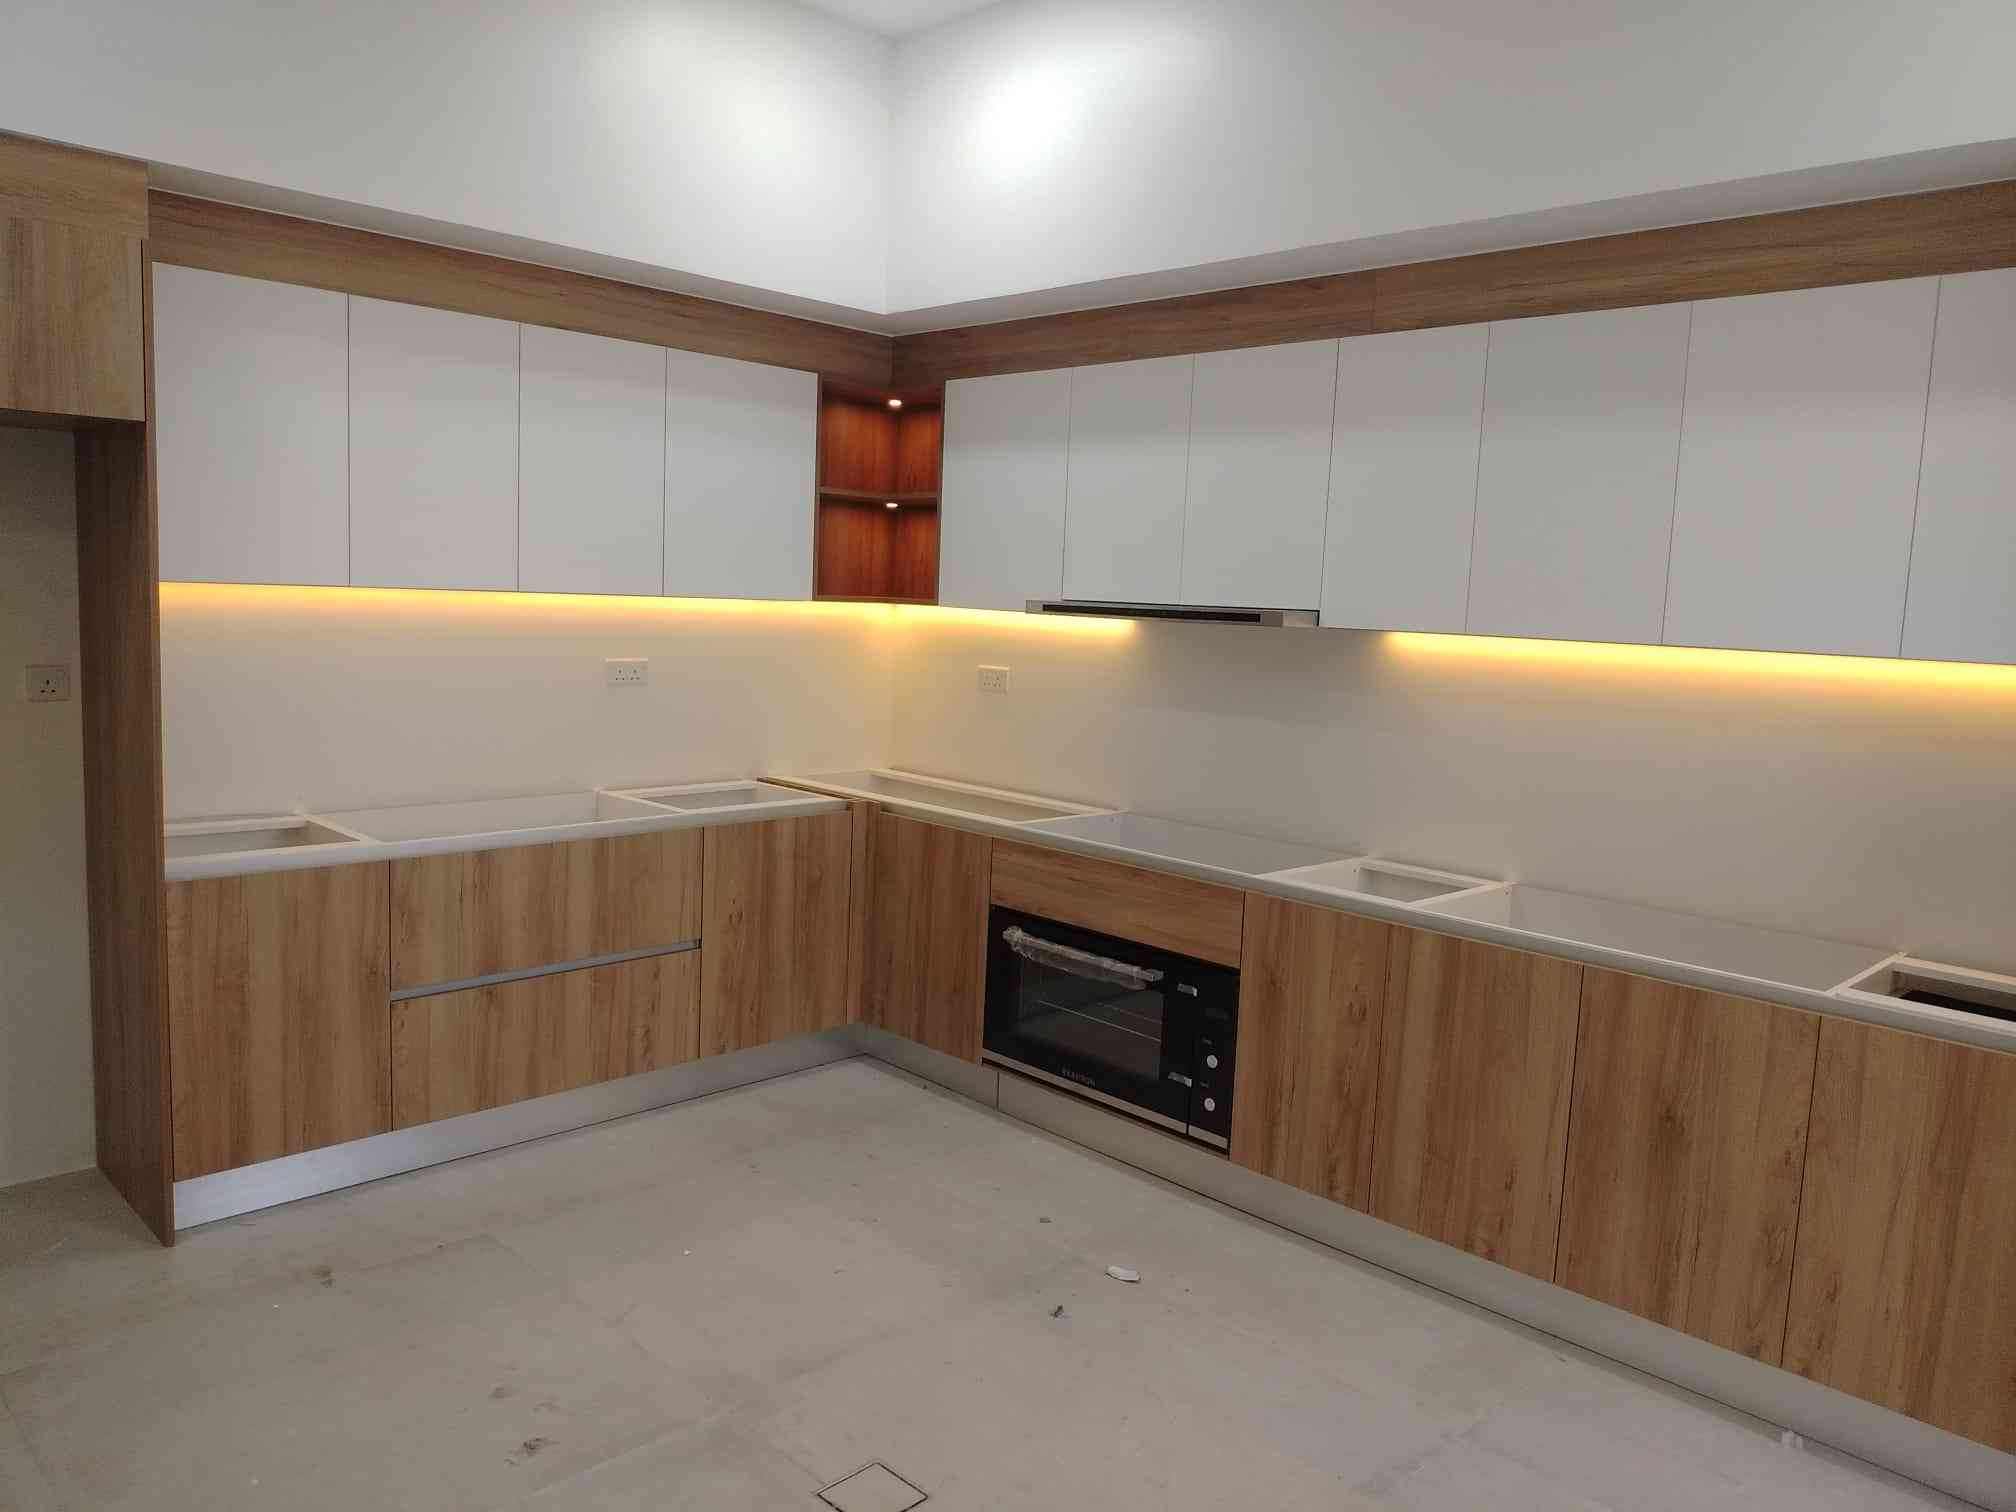 Classic L-Shaped Kitchen Design In Wood And White With Marble Backsplash